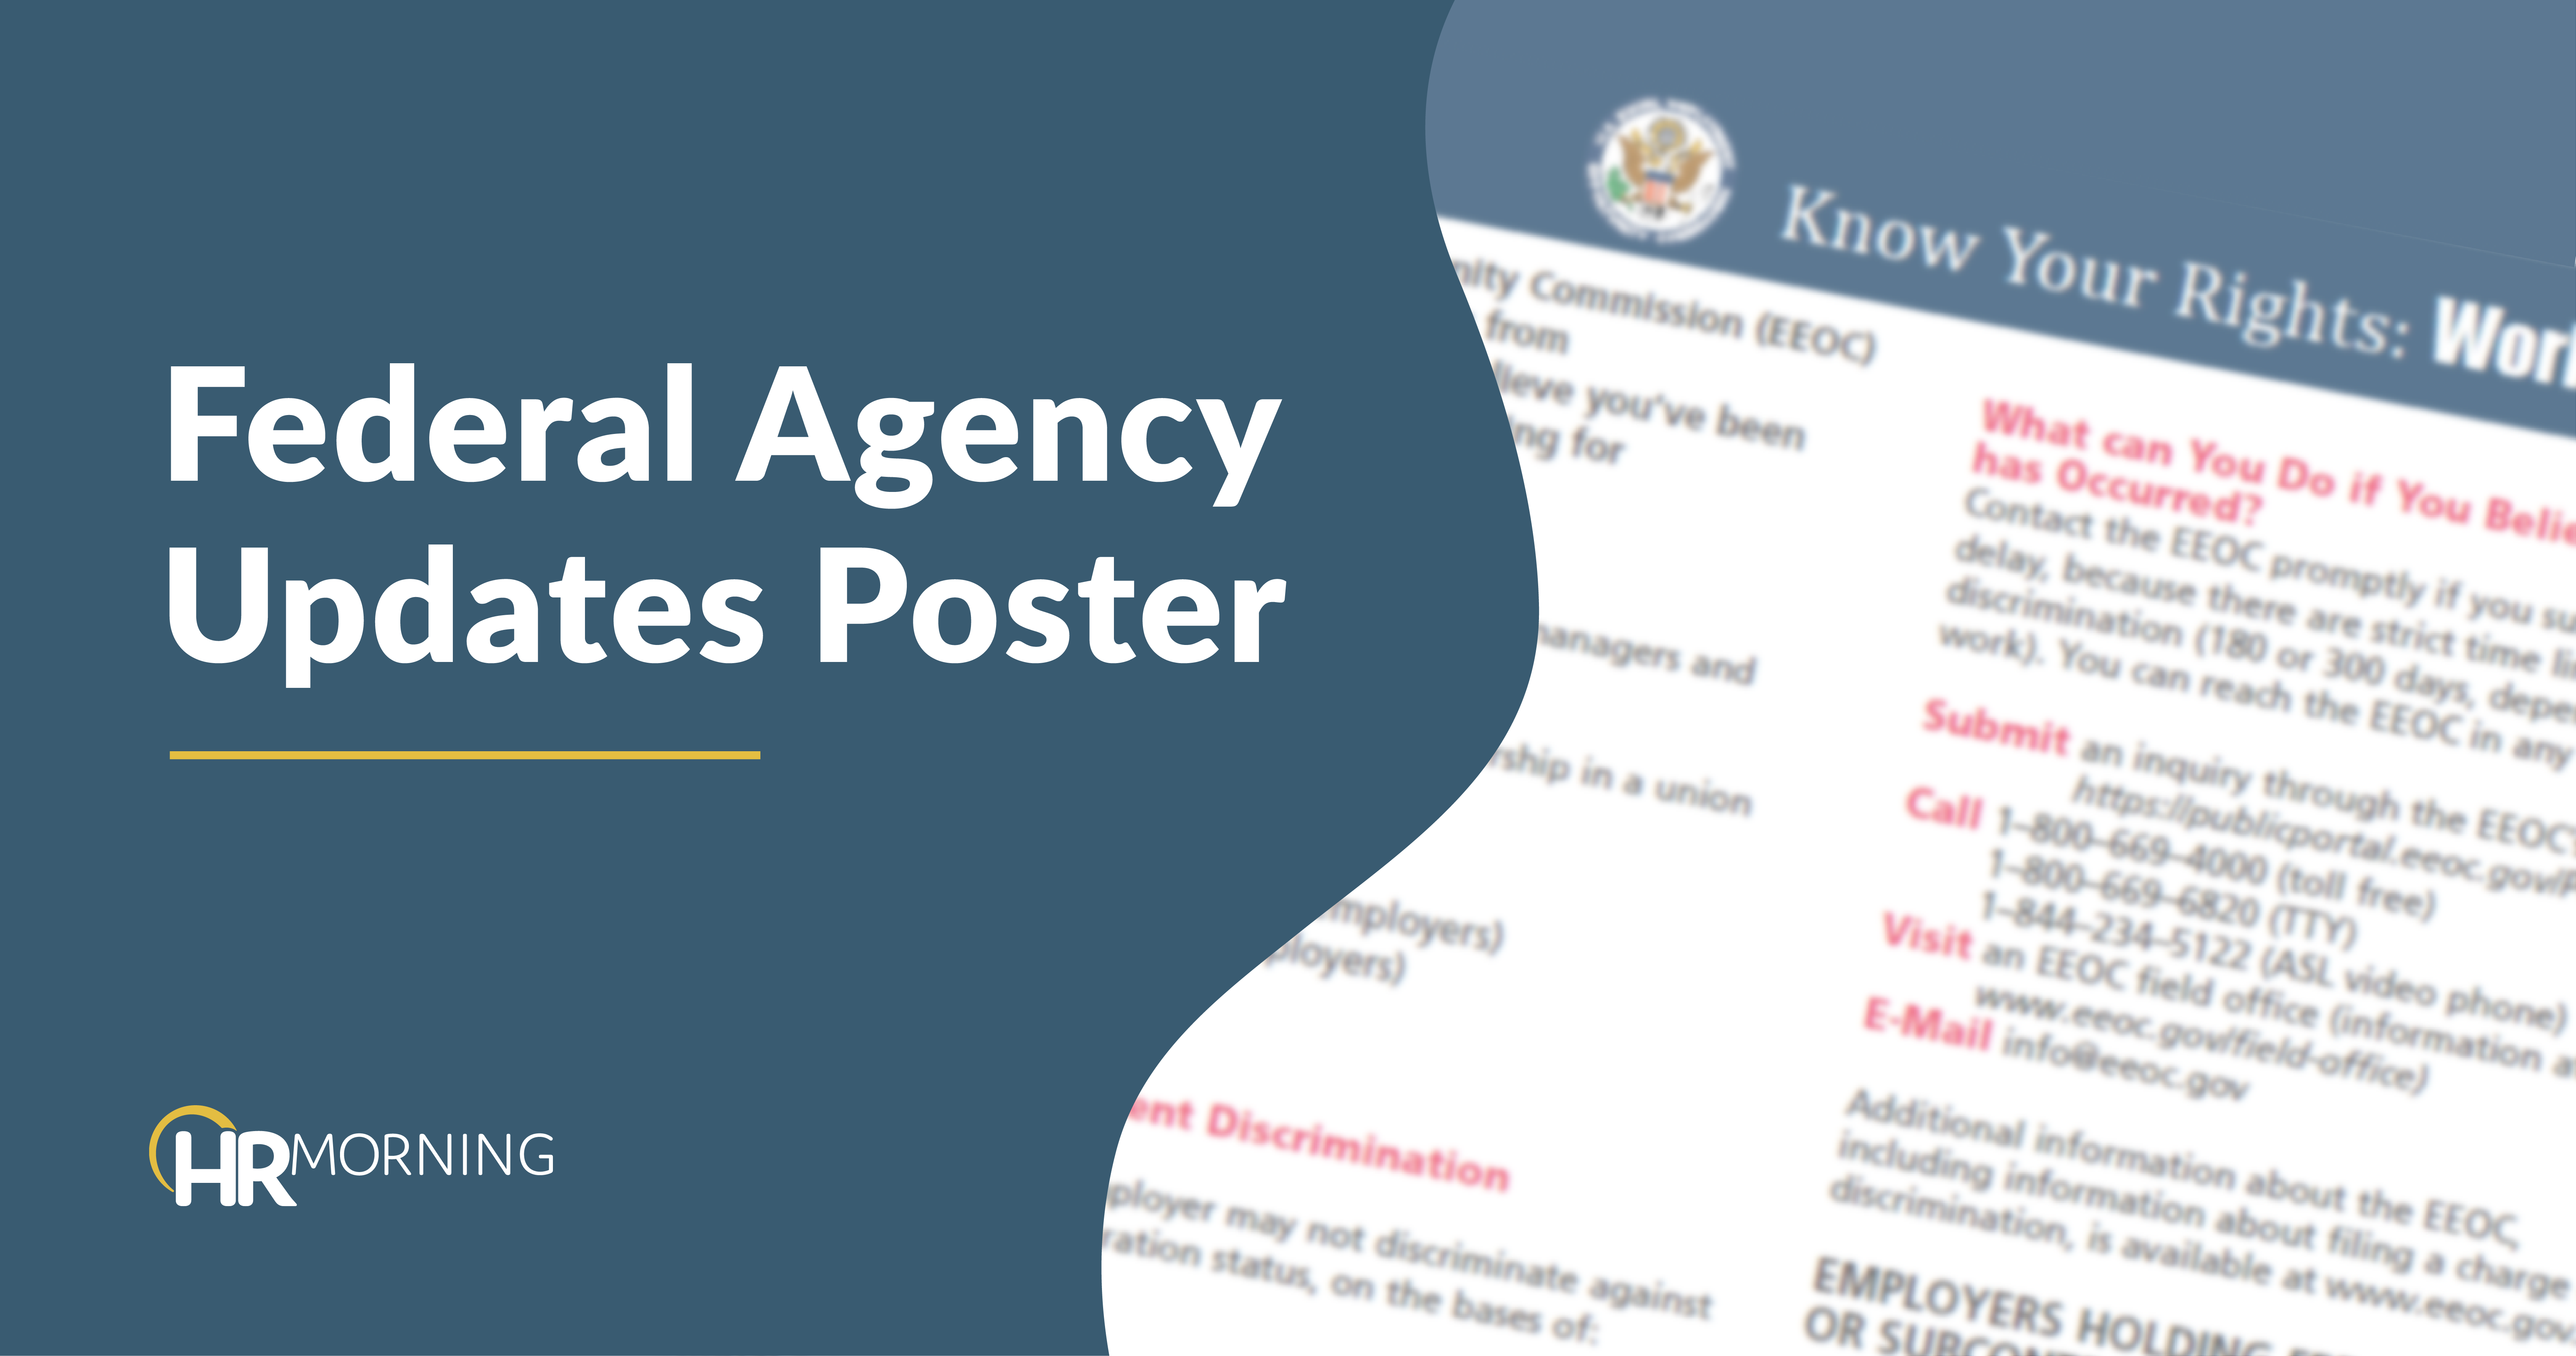 Federal agency updates poster